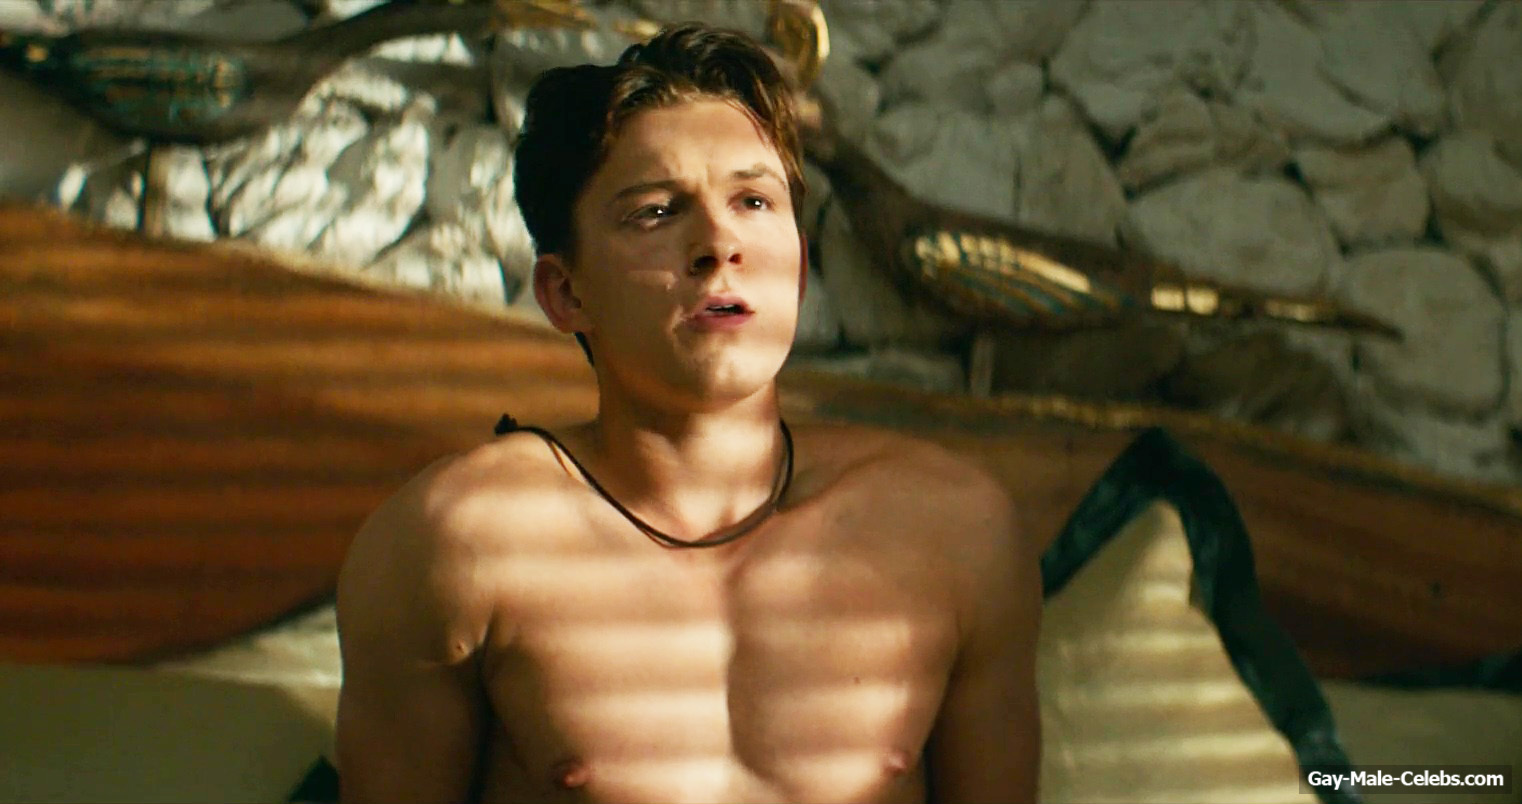 Tom Holland Shirtless And Sexy in Uncharted